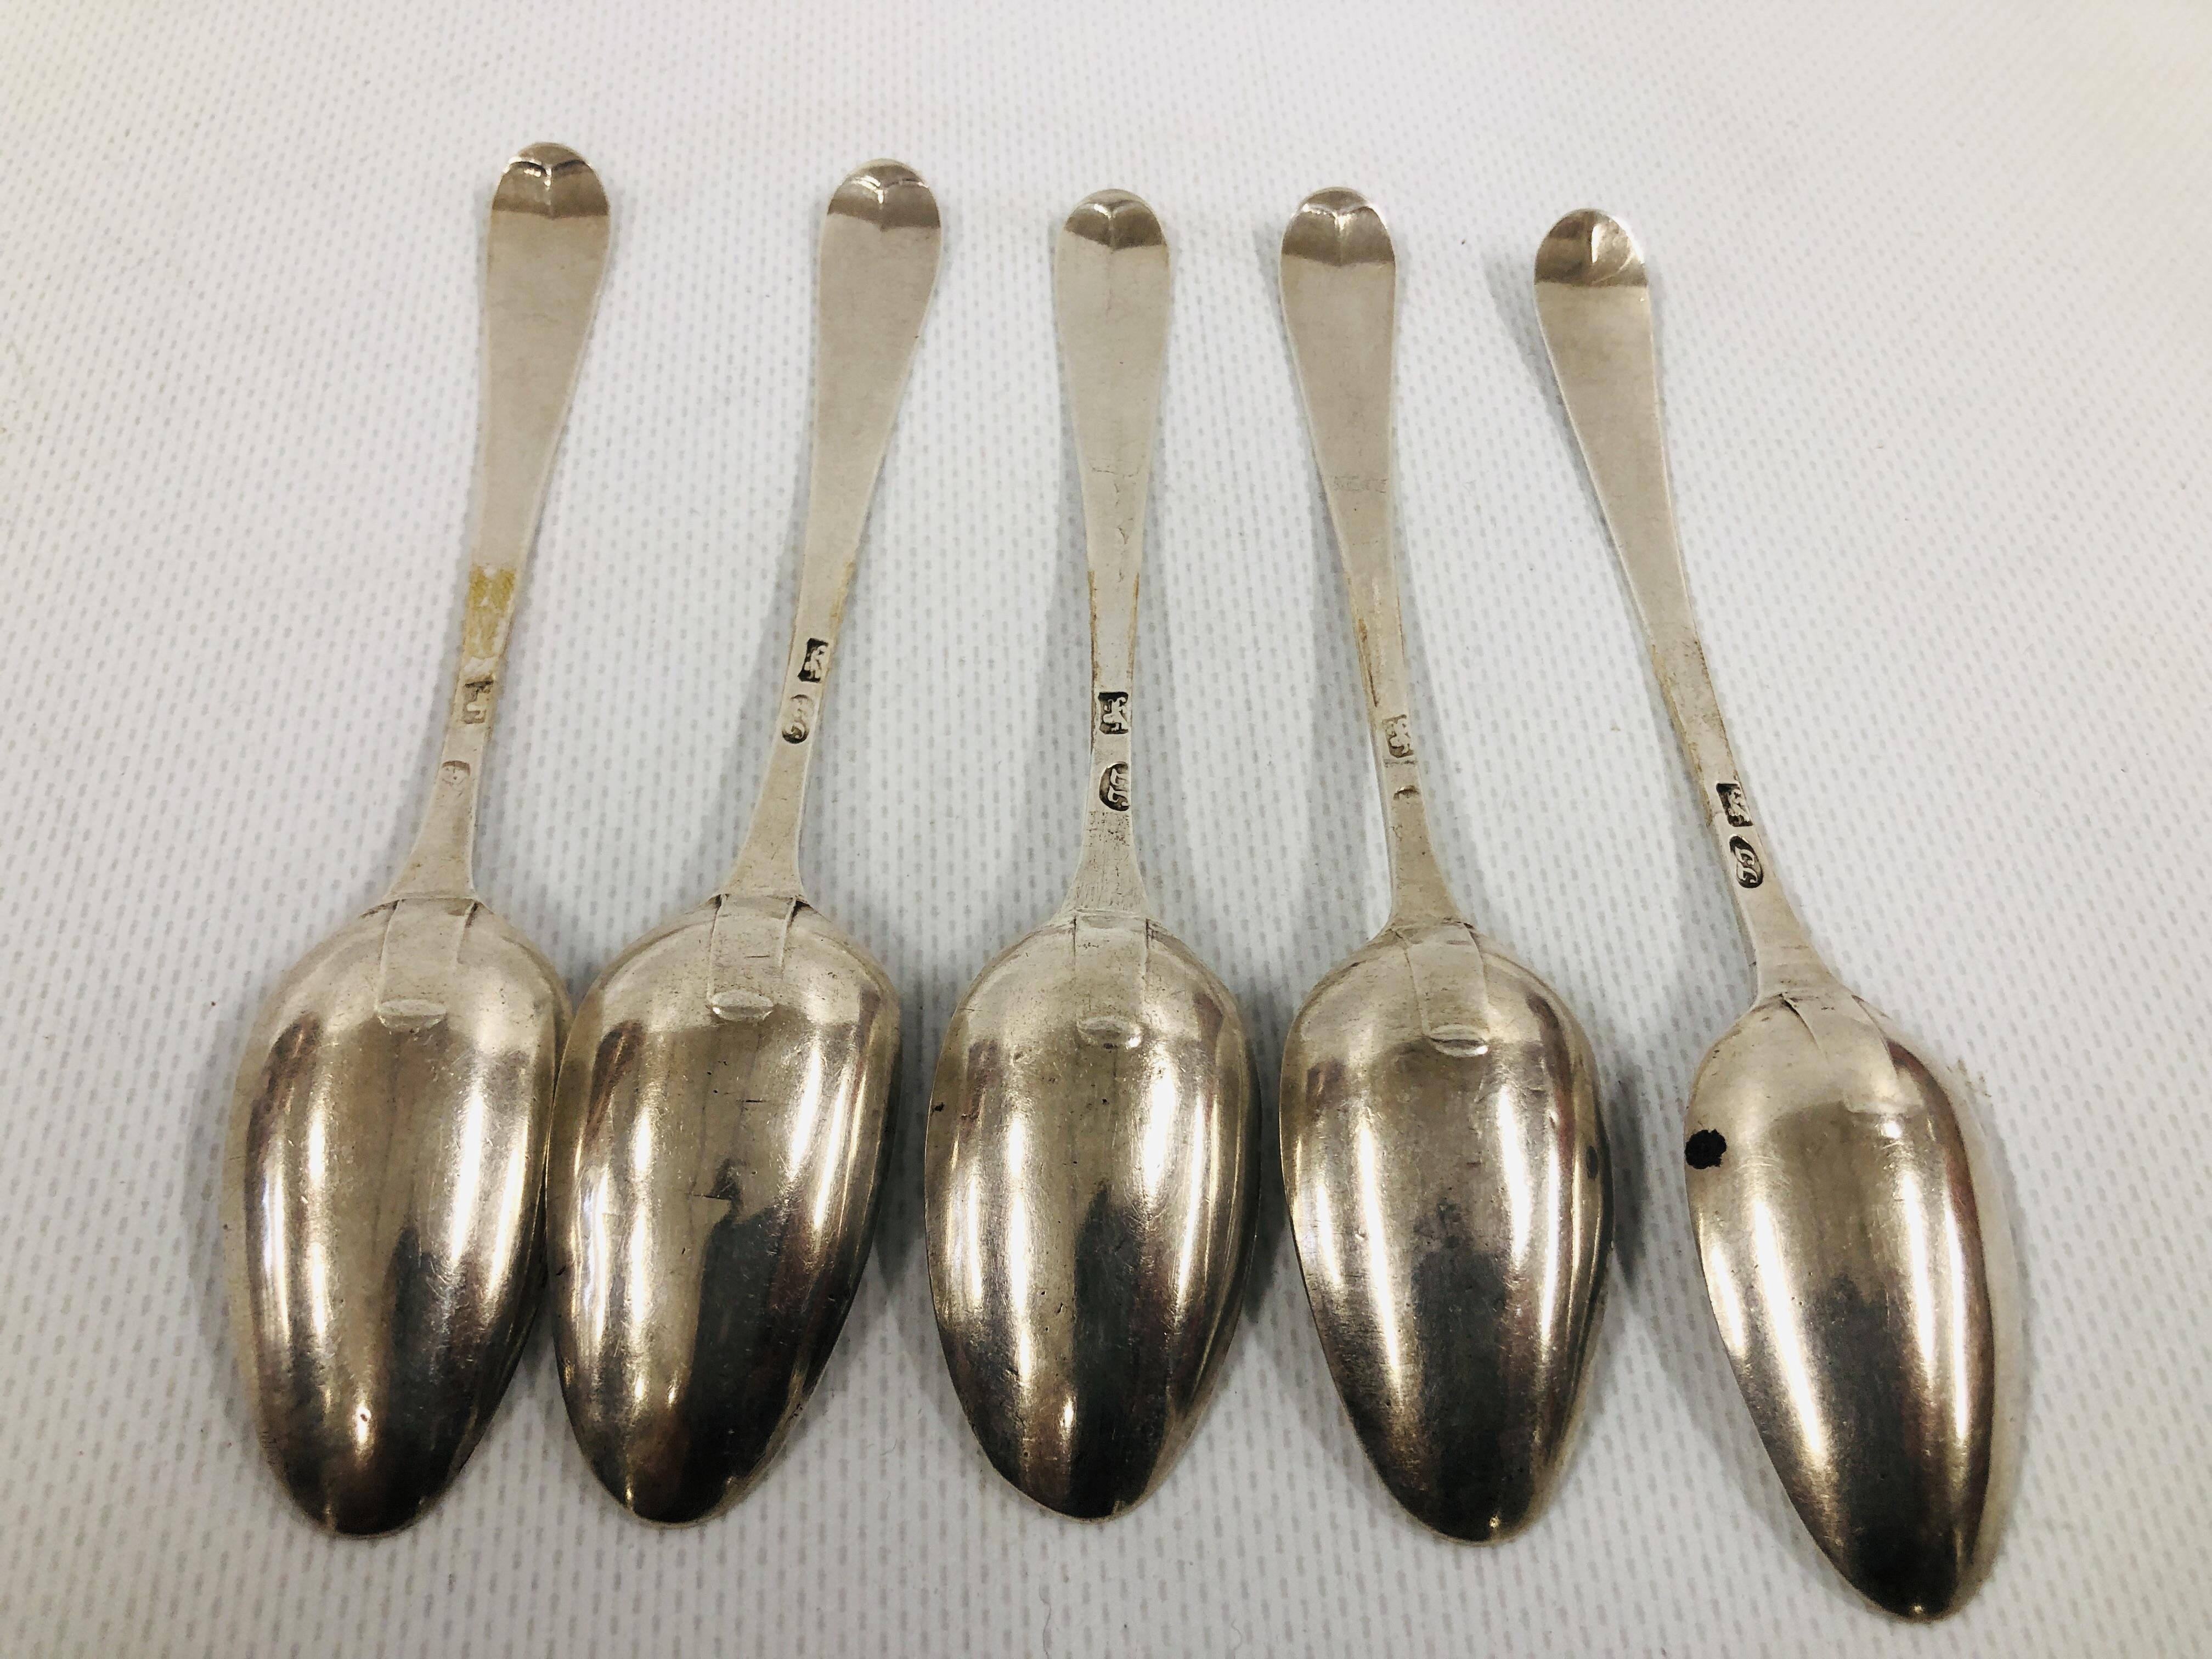 SET OF SIX SILVER GEORGE IV BRIGHT CUT TEA SPOONS, c1810. - Image 5 of 9